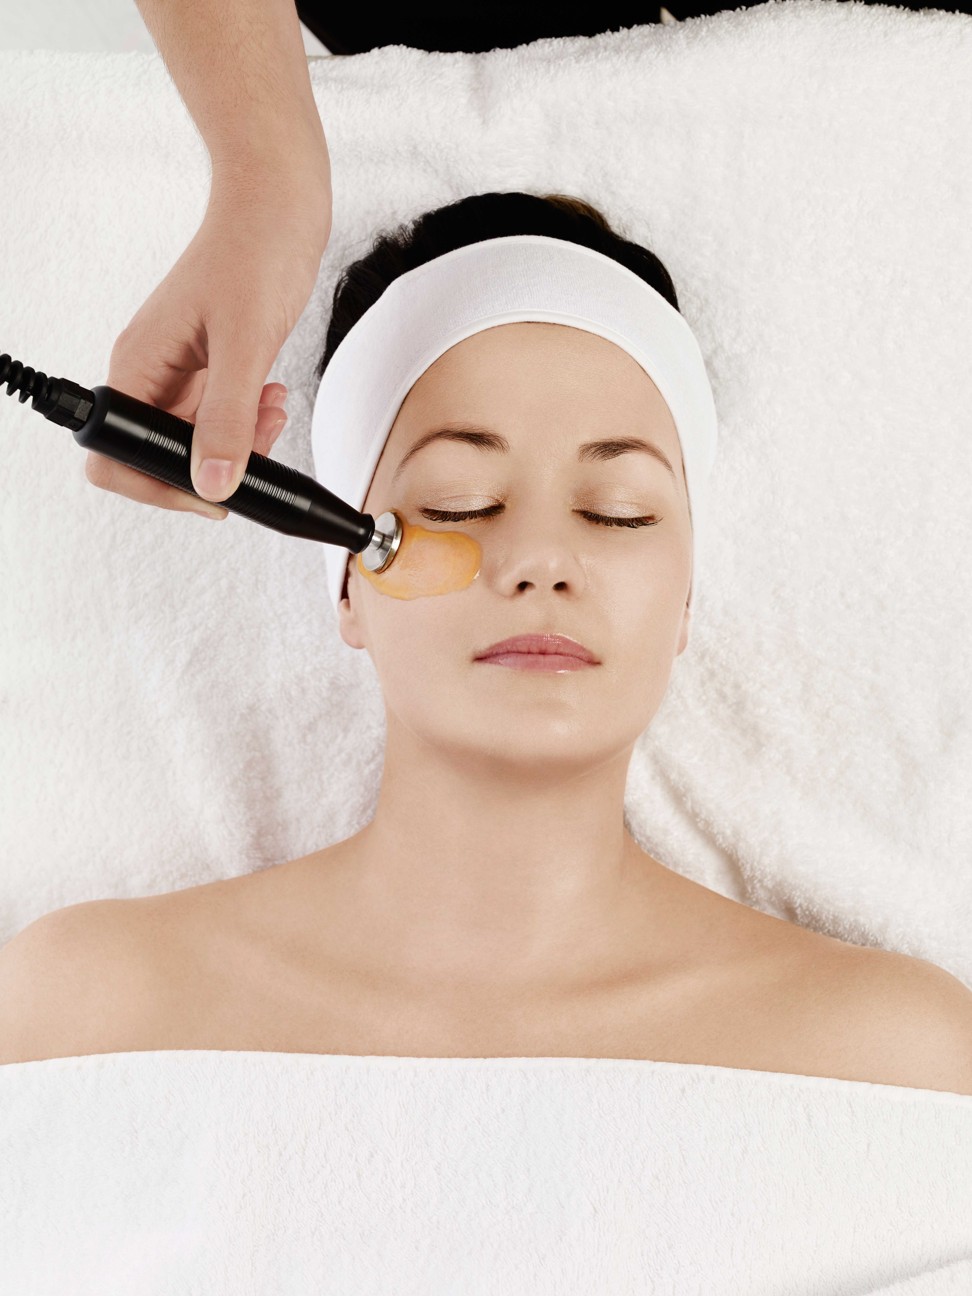 The Environ Optimal Skin Facial at The Mandarin Spa refreshes with a gentle cleanse and peel before technology kicks in with the Ionzyme Electro-Sonic DF Machine.